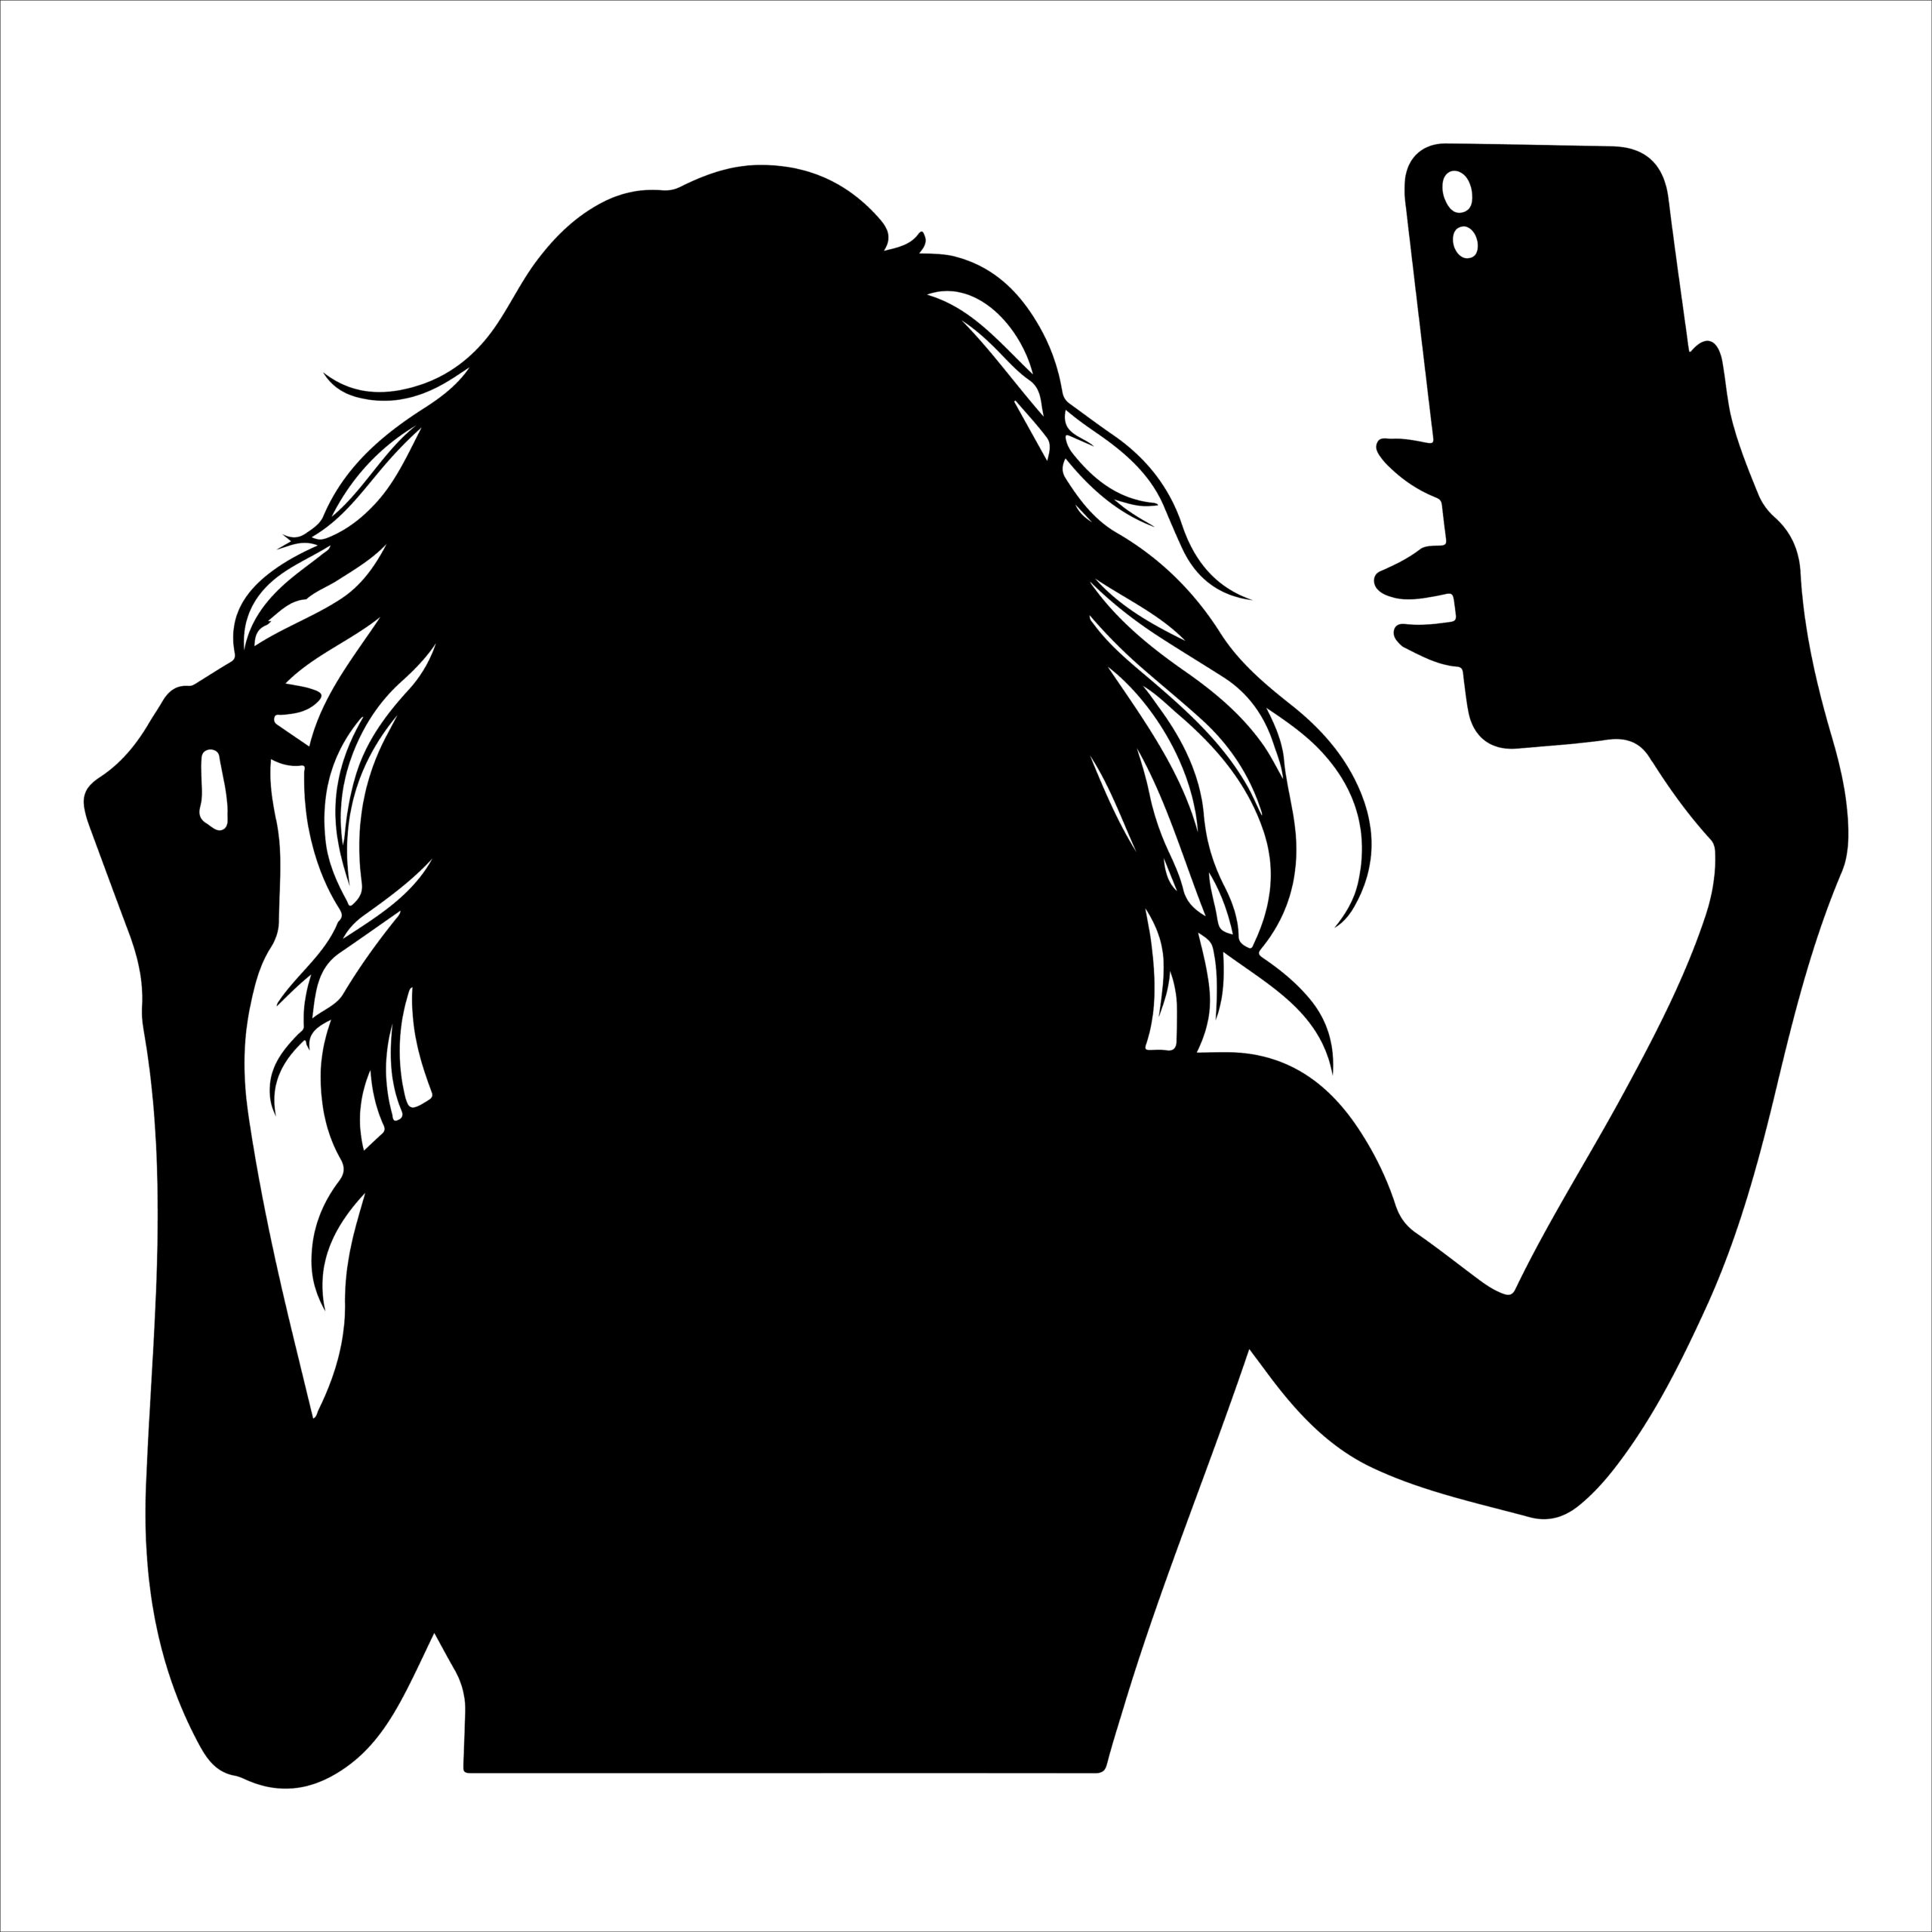 Sextortion and Revenge Porn – What If It Happens To You?